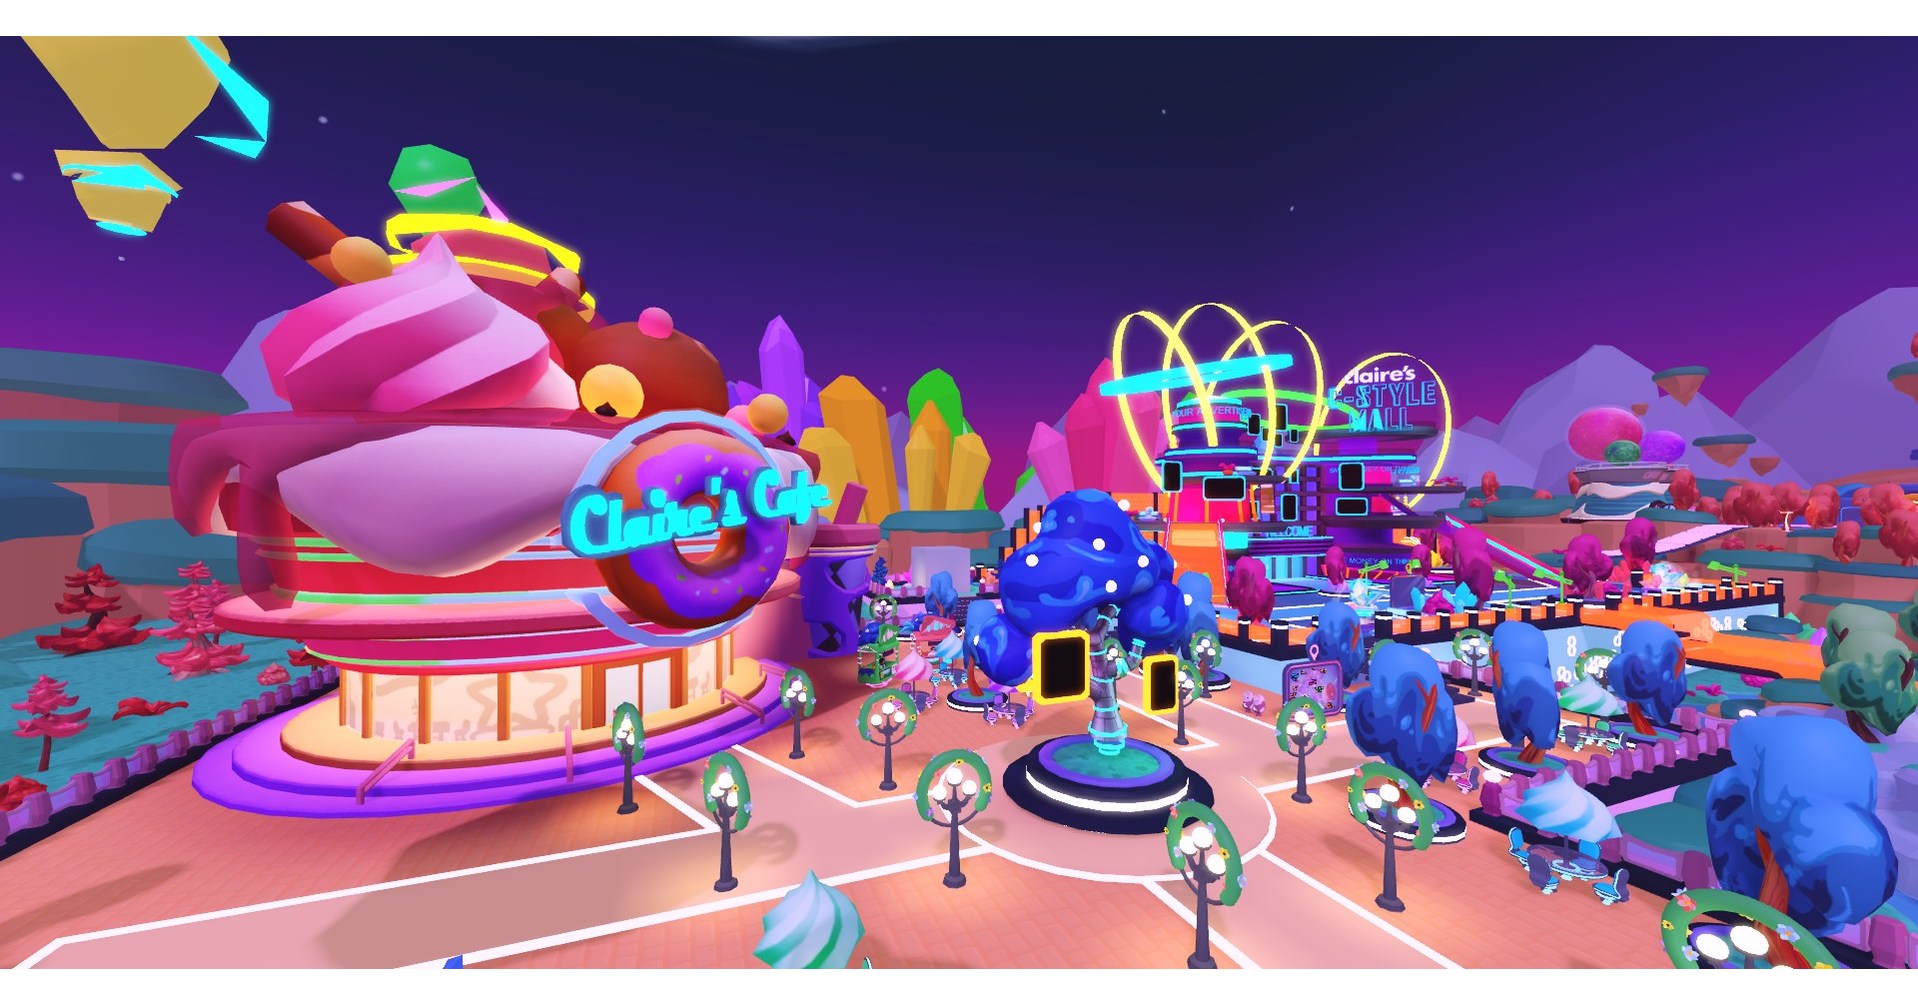 Exclusive: Claire's launches Sims-like town Shimmerville on Roblox